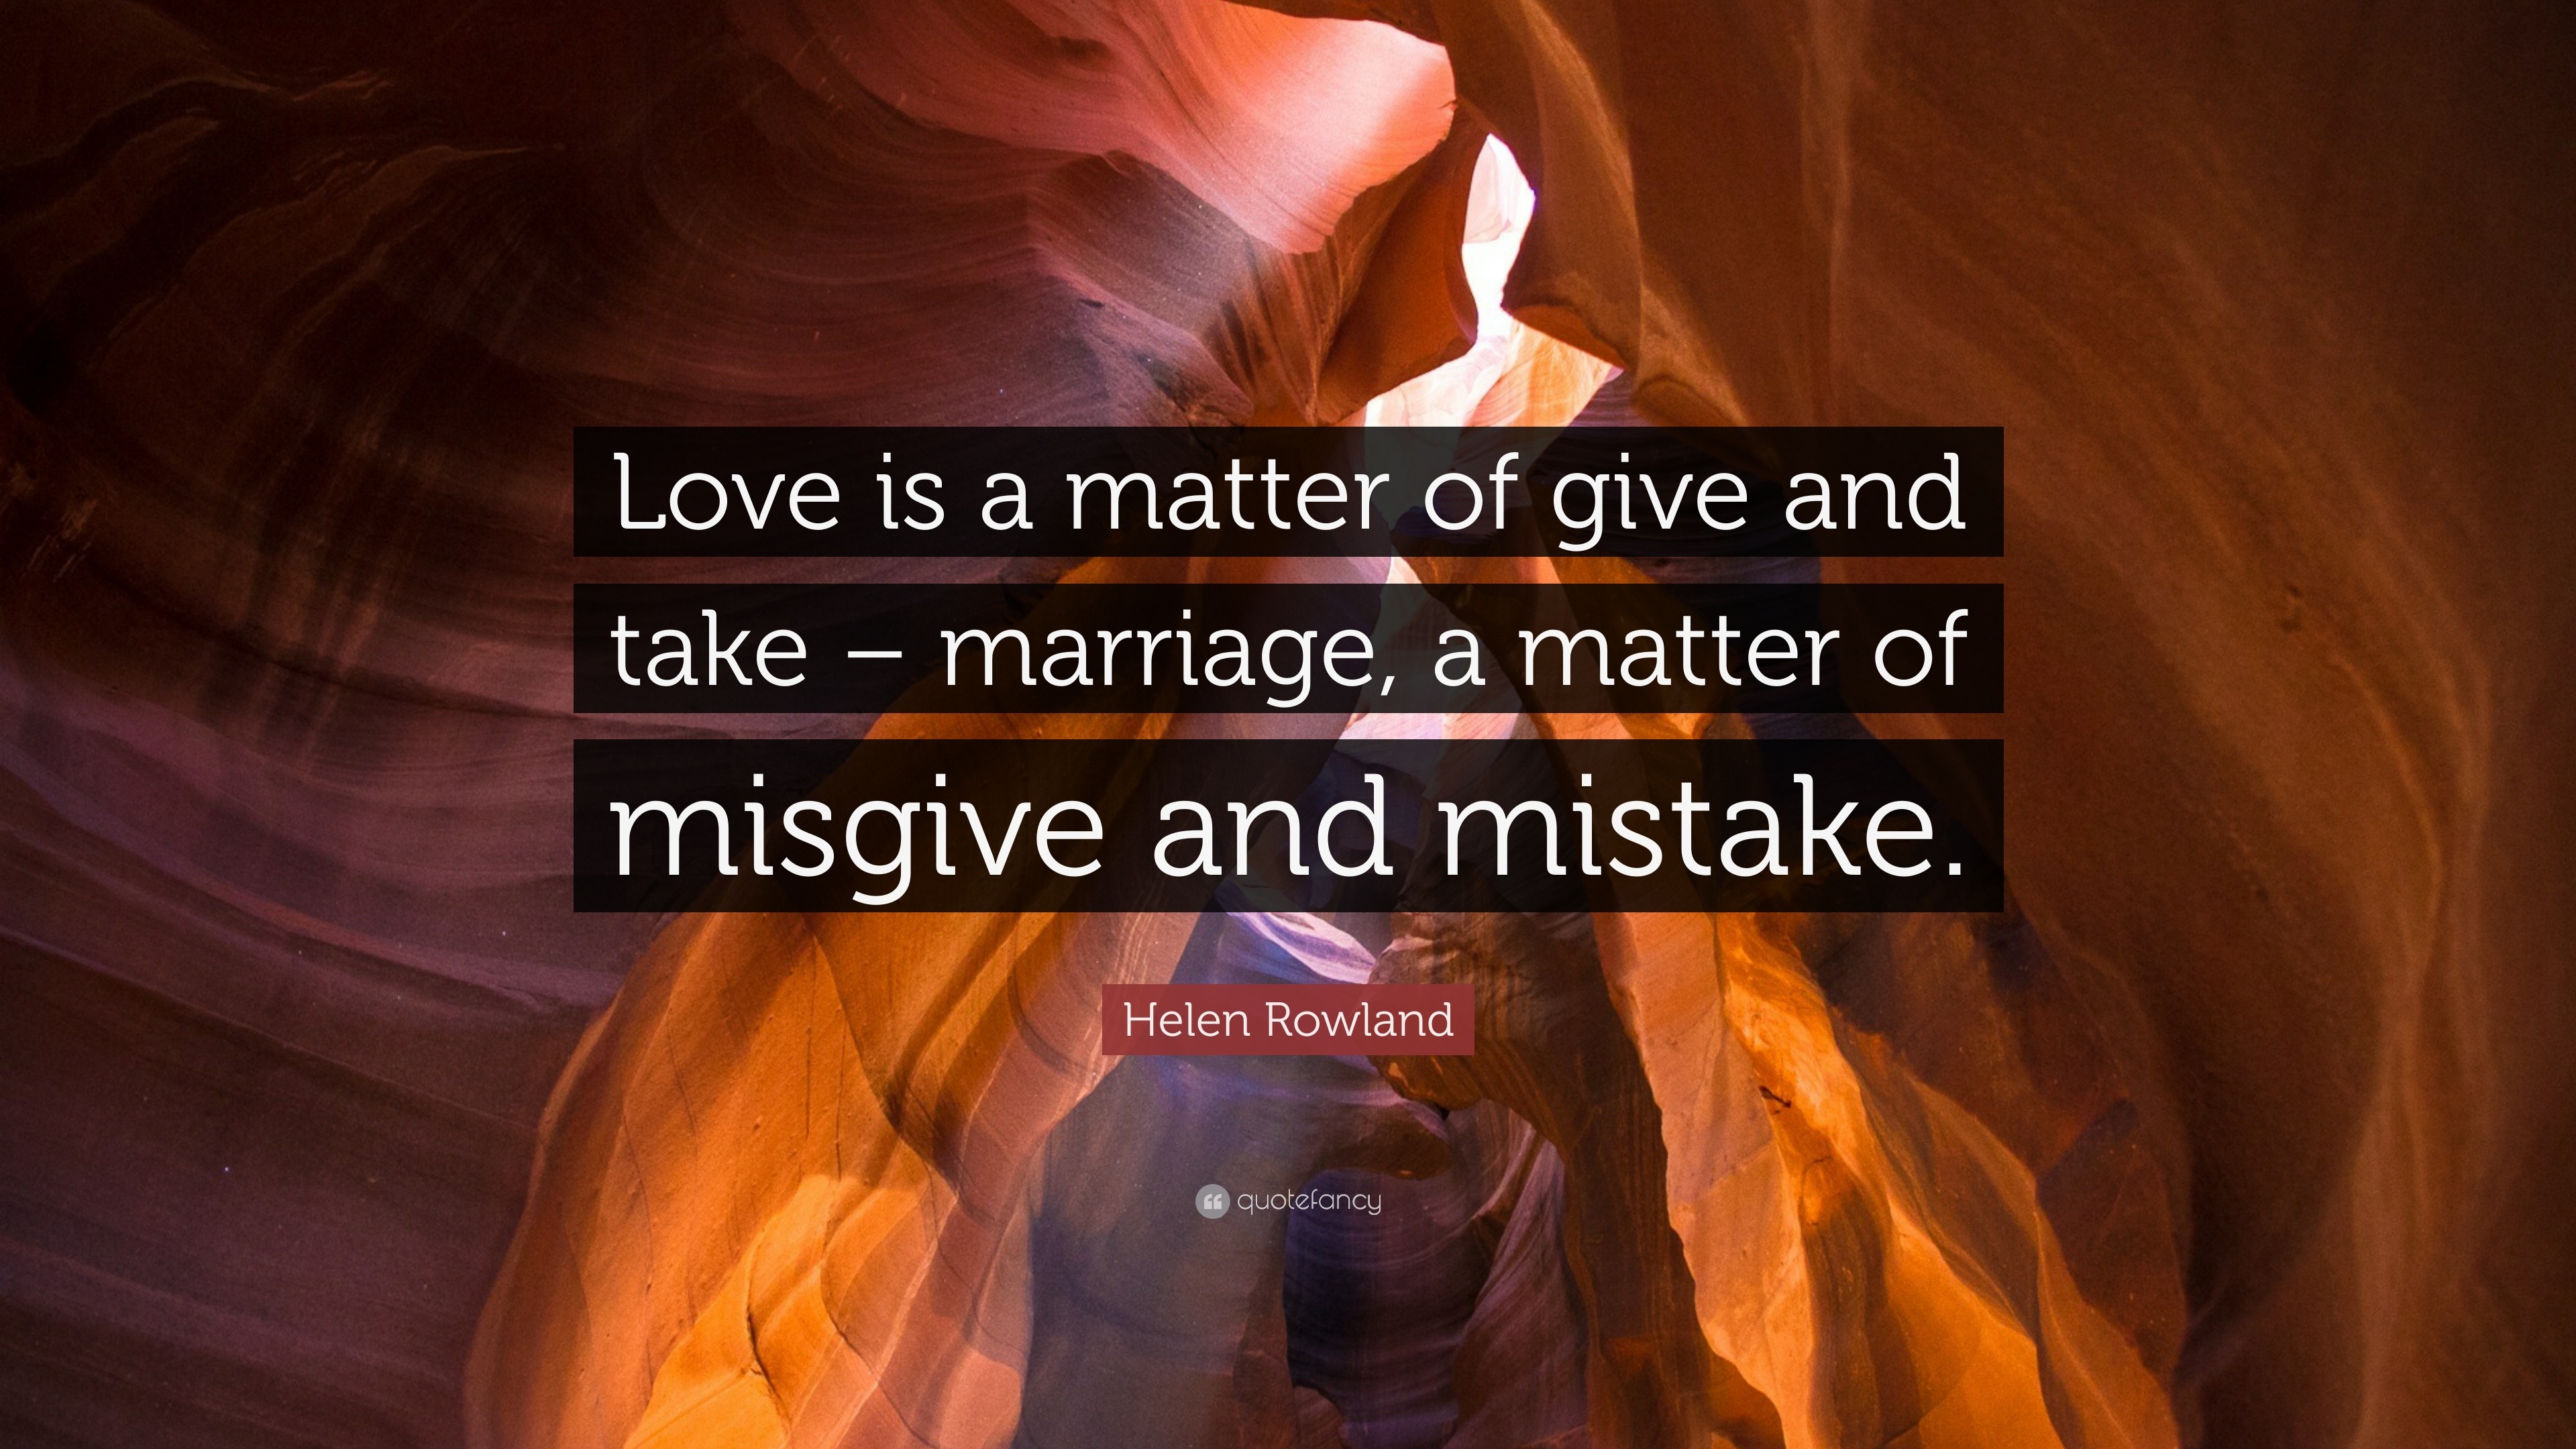 Helen Rowland Quote: “Love is a matter of give and take – marriage, a matter  of misgive